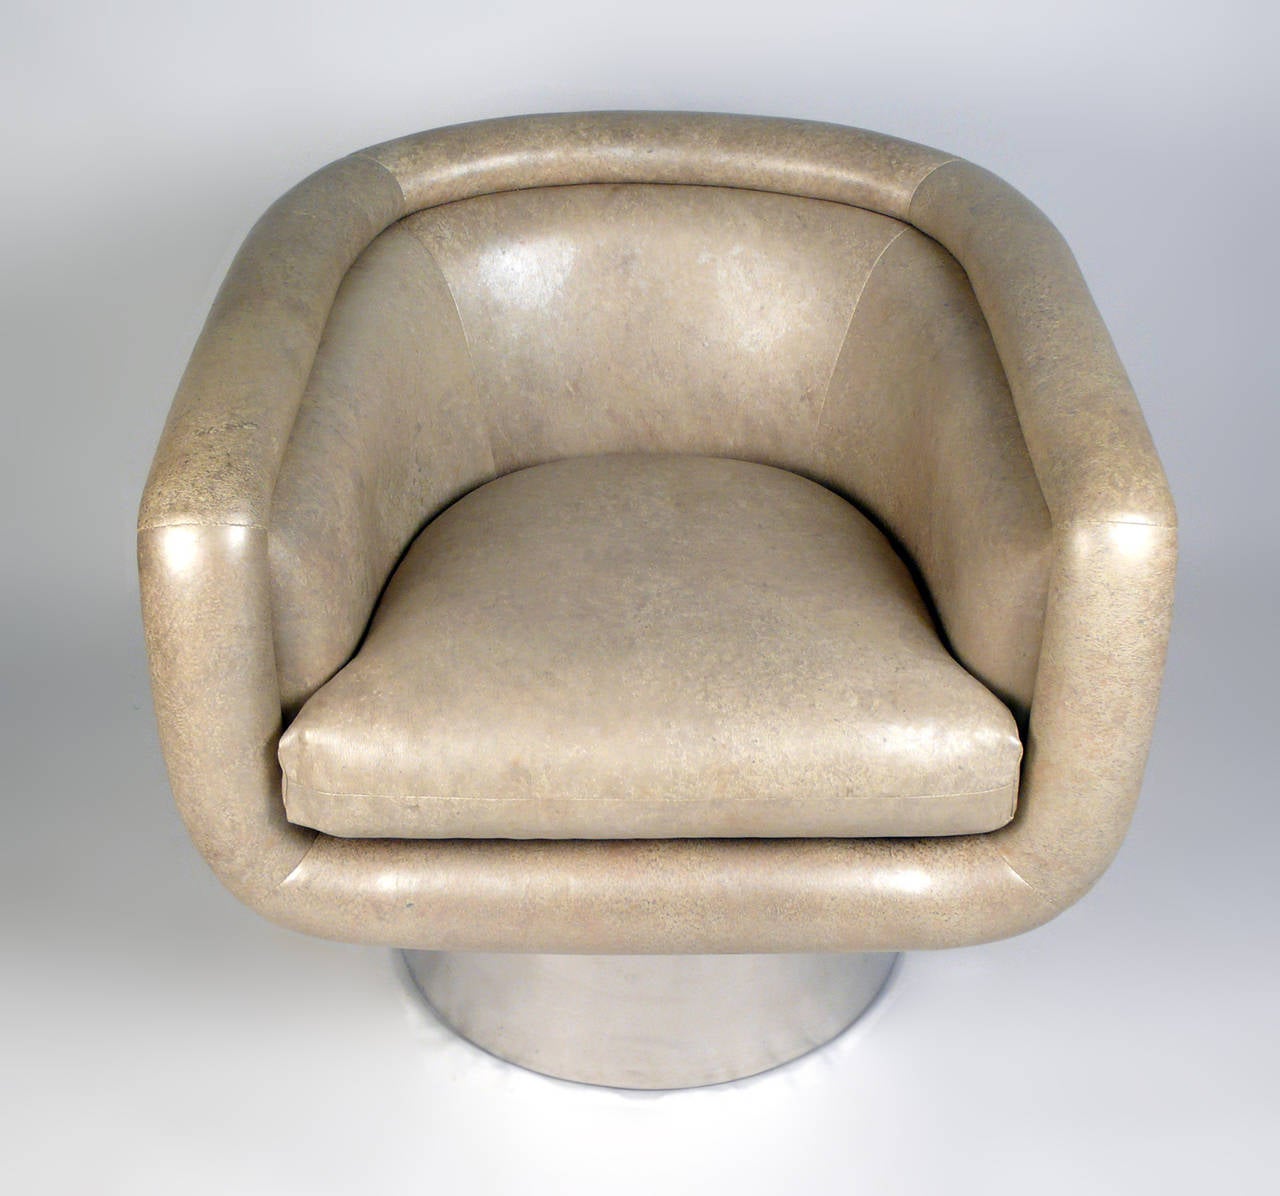 Mid-Century Modern Leon Rosen Swivel Tub Chairs for Pace in Mirror Polished Stainless